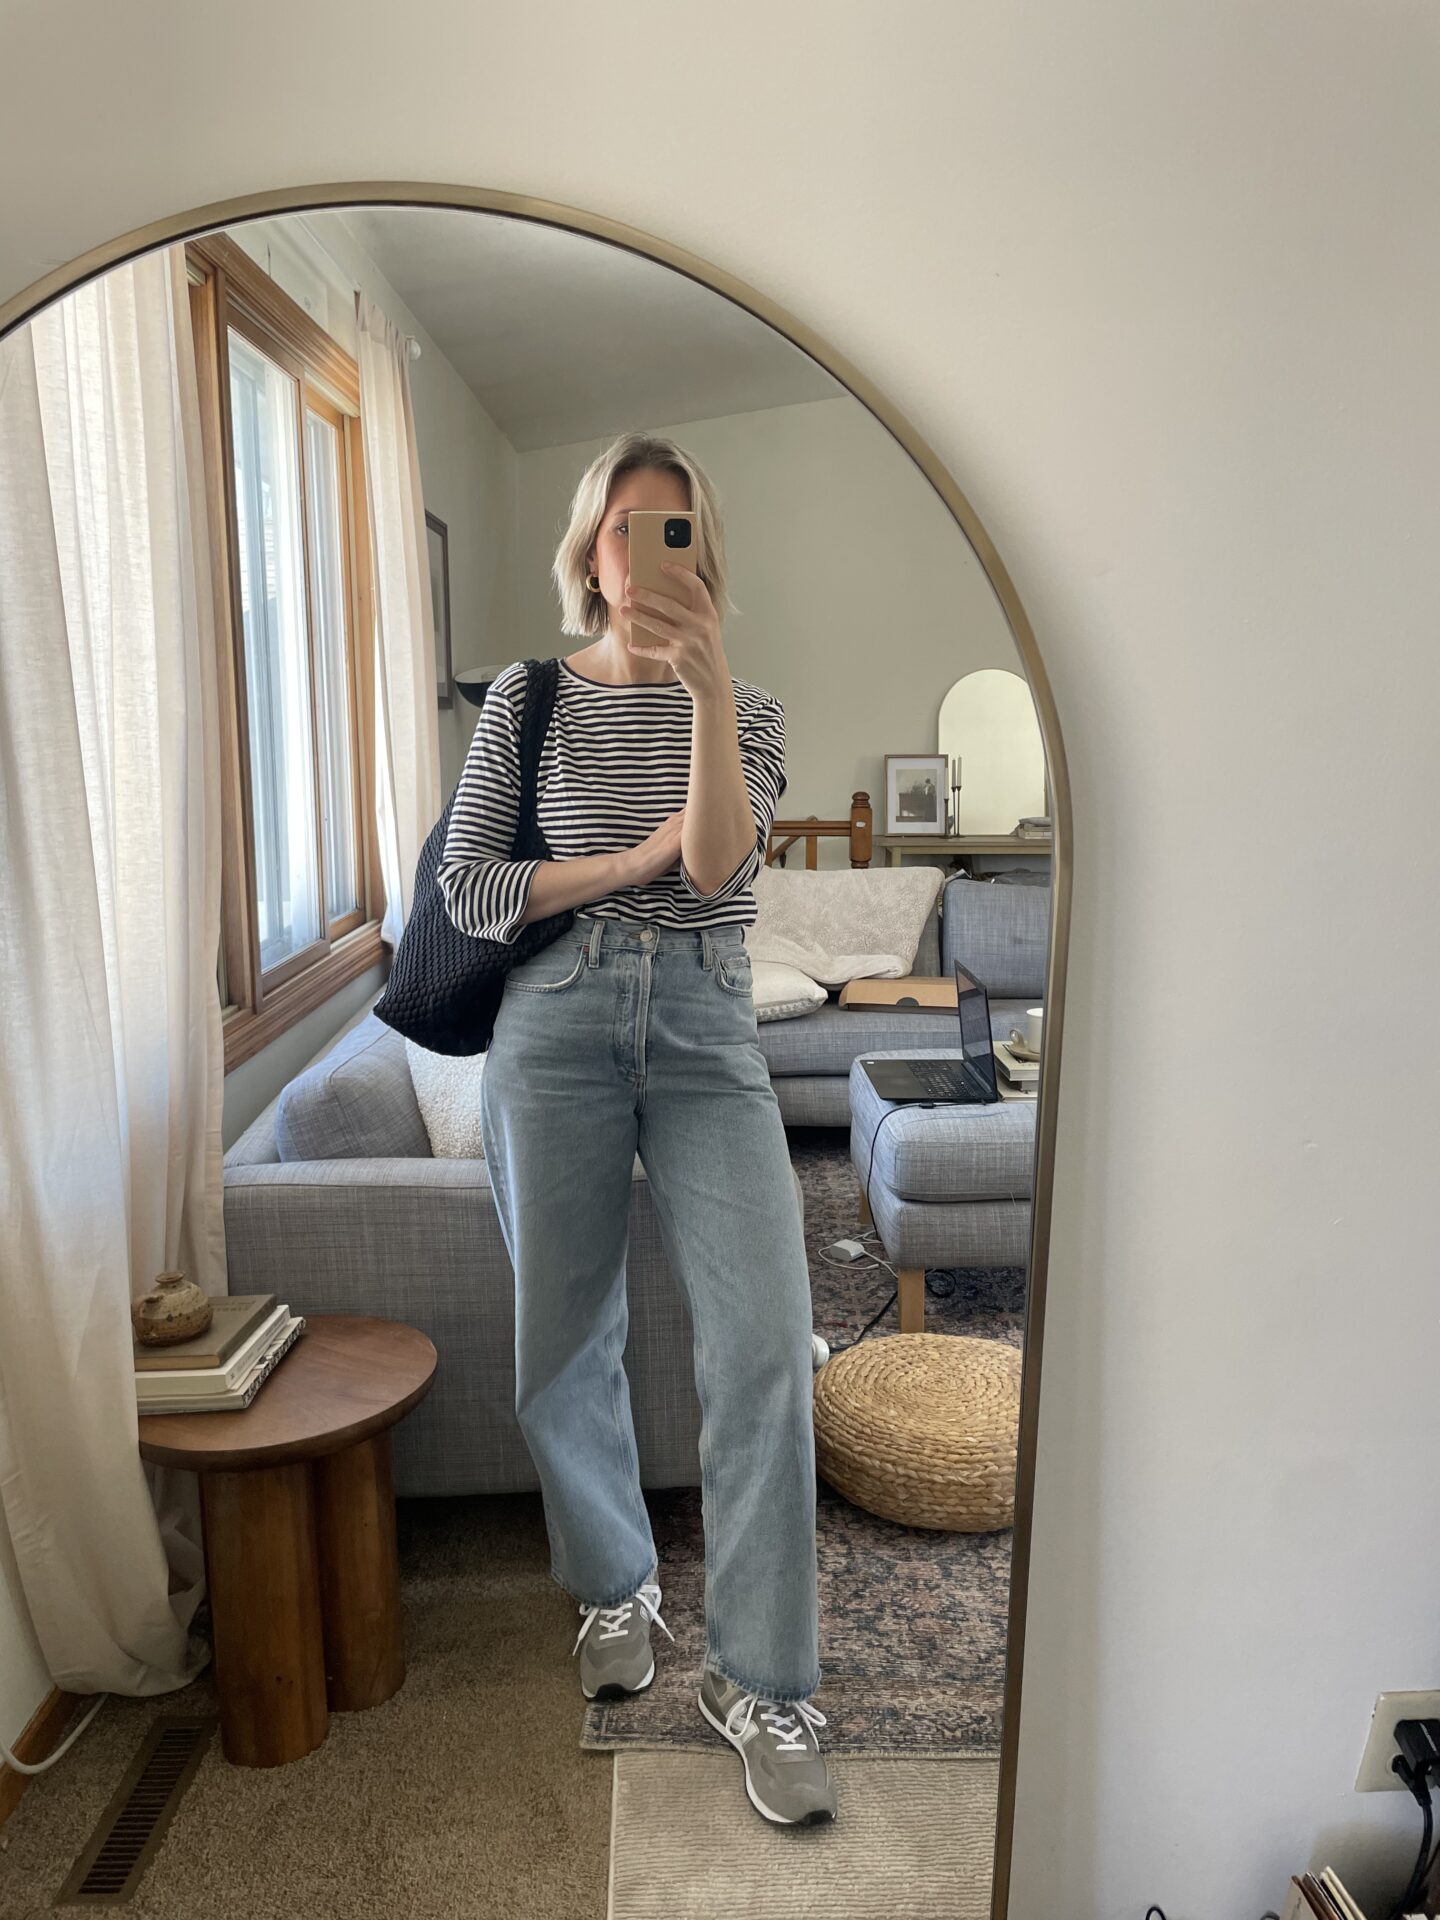 Karin Emily stands in front of a mirror wearing a striped shirt, gray new balance sneakers and baggy jeans 